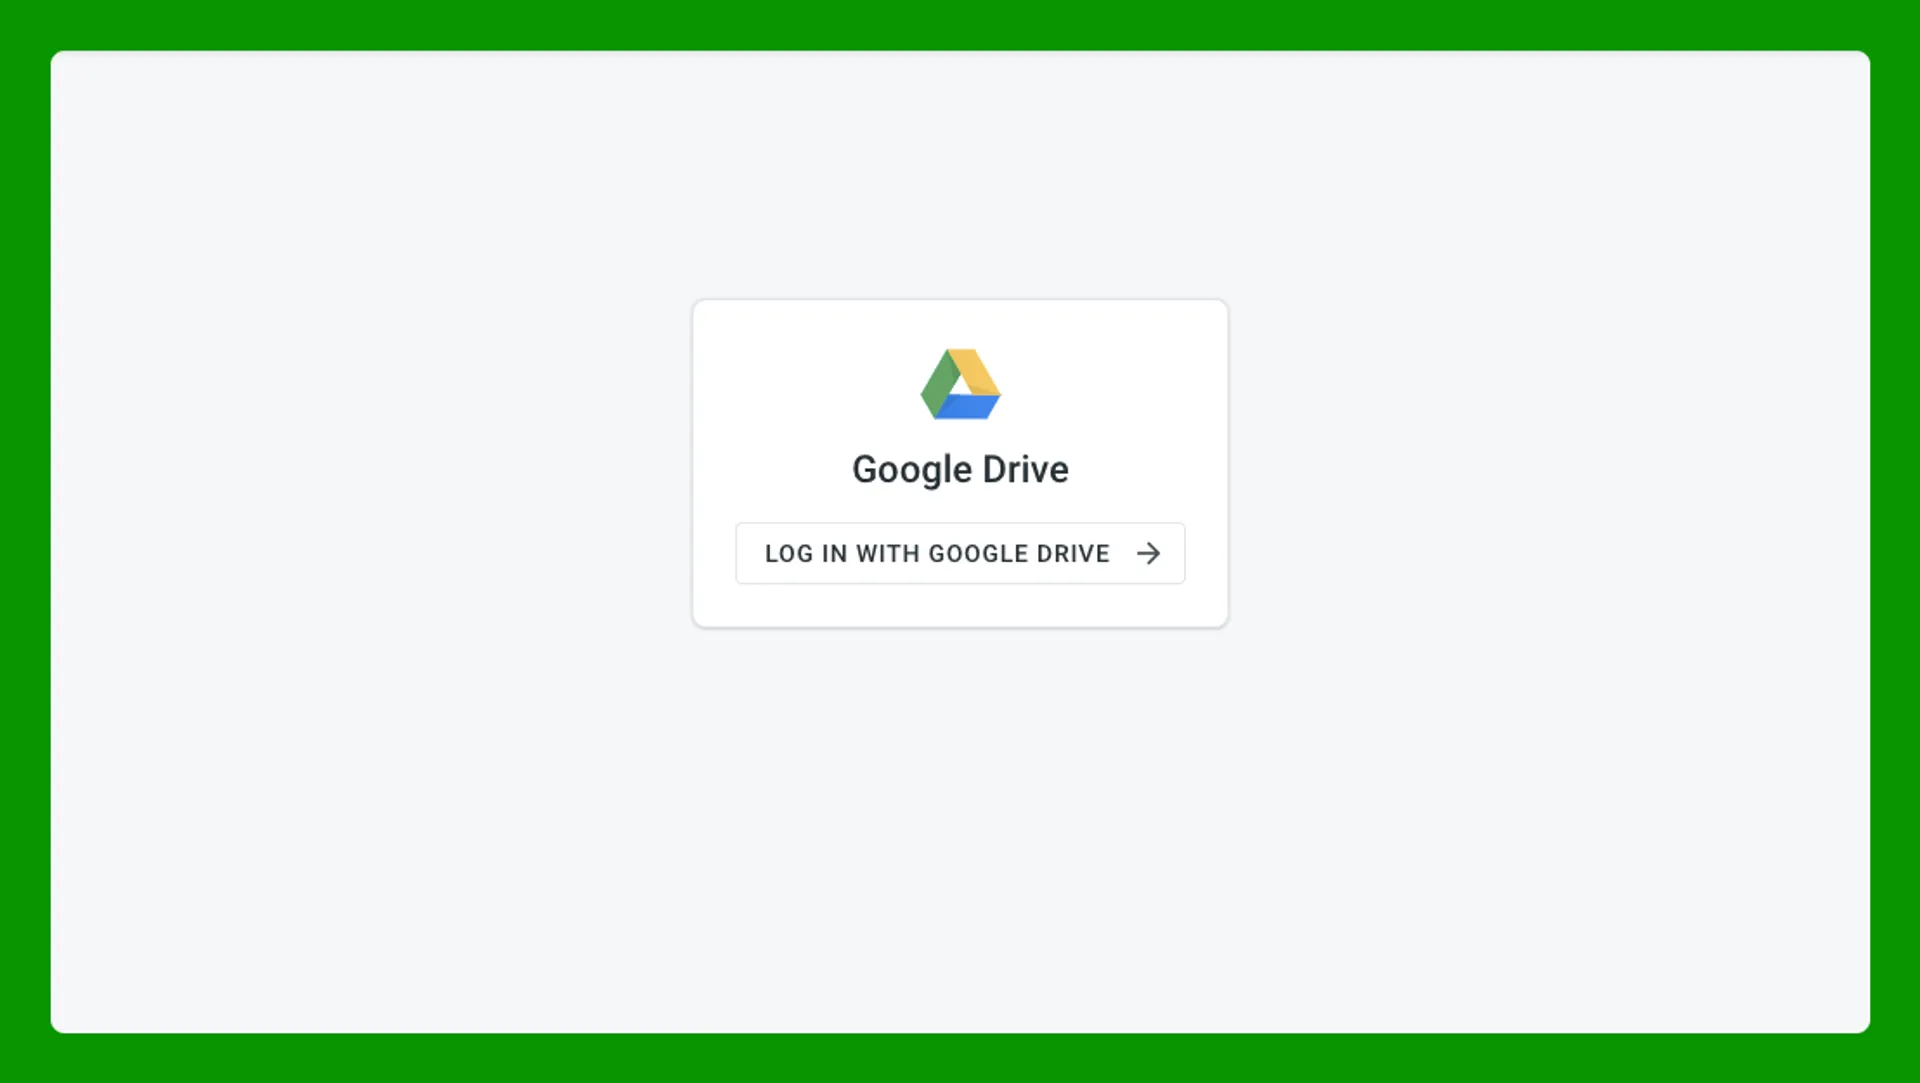 Google Drive + Crowdin  Translate & localize your content